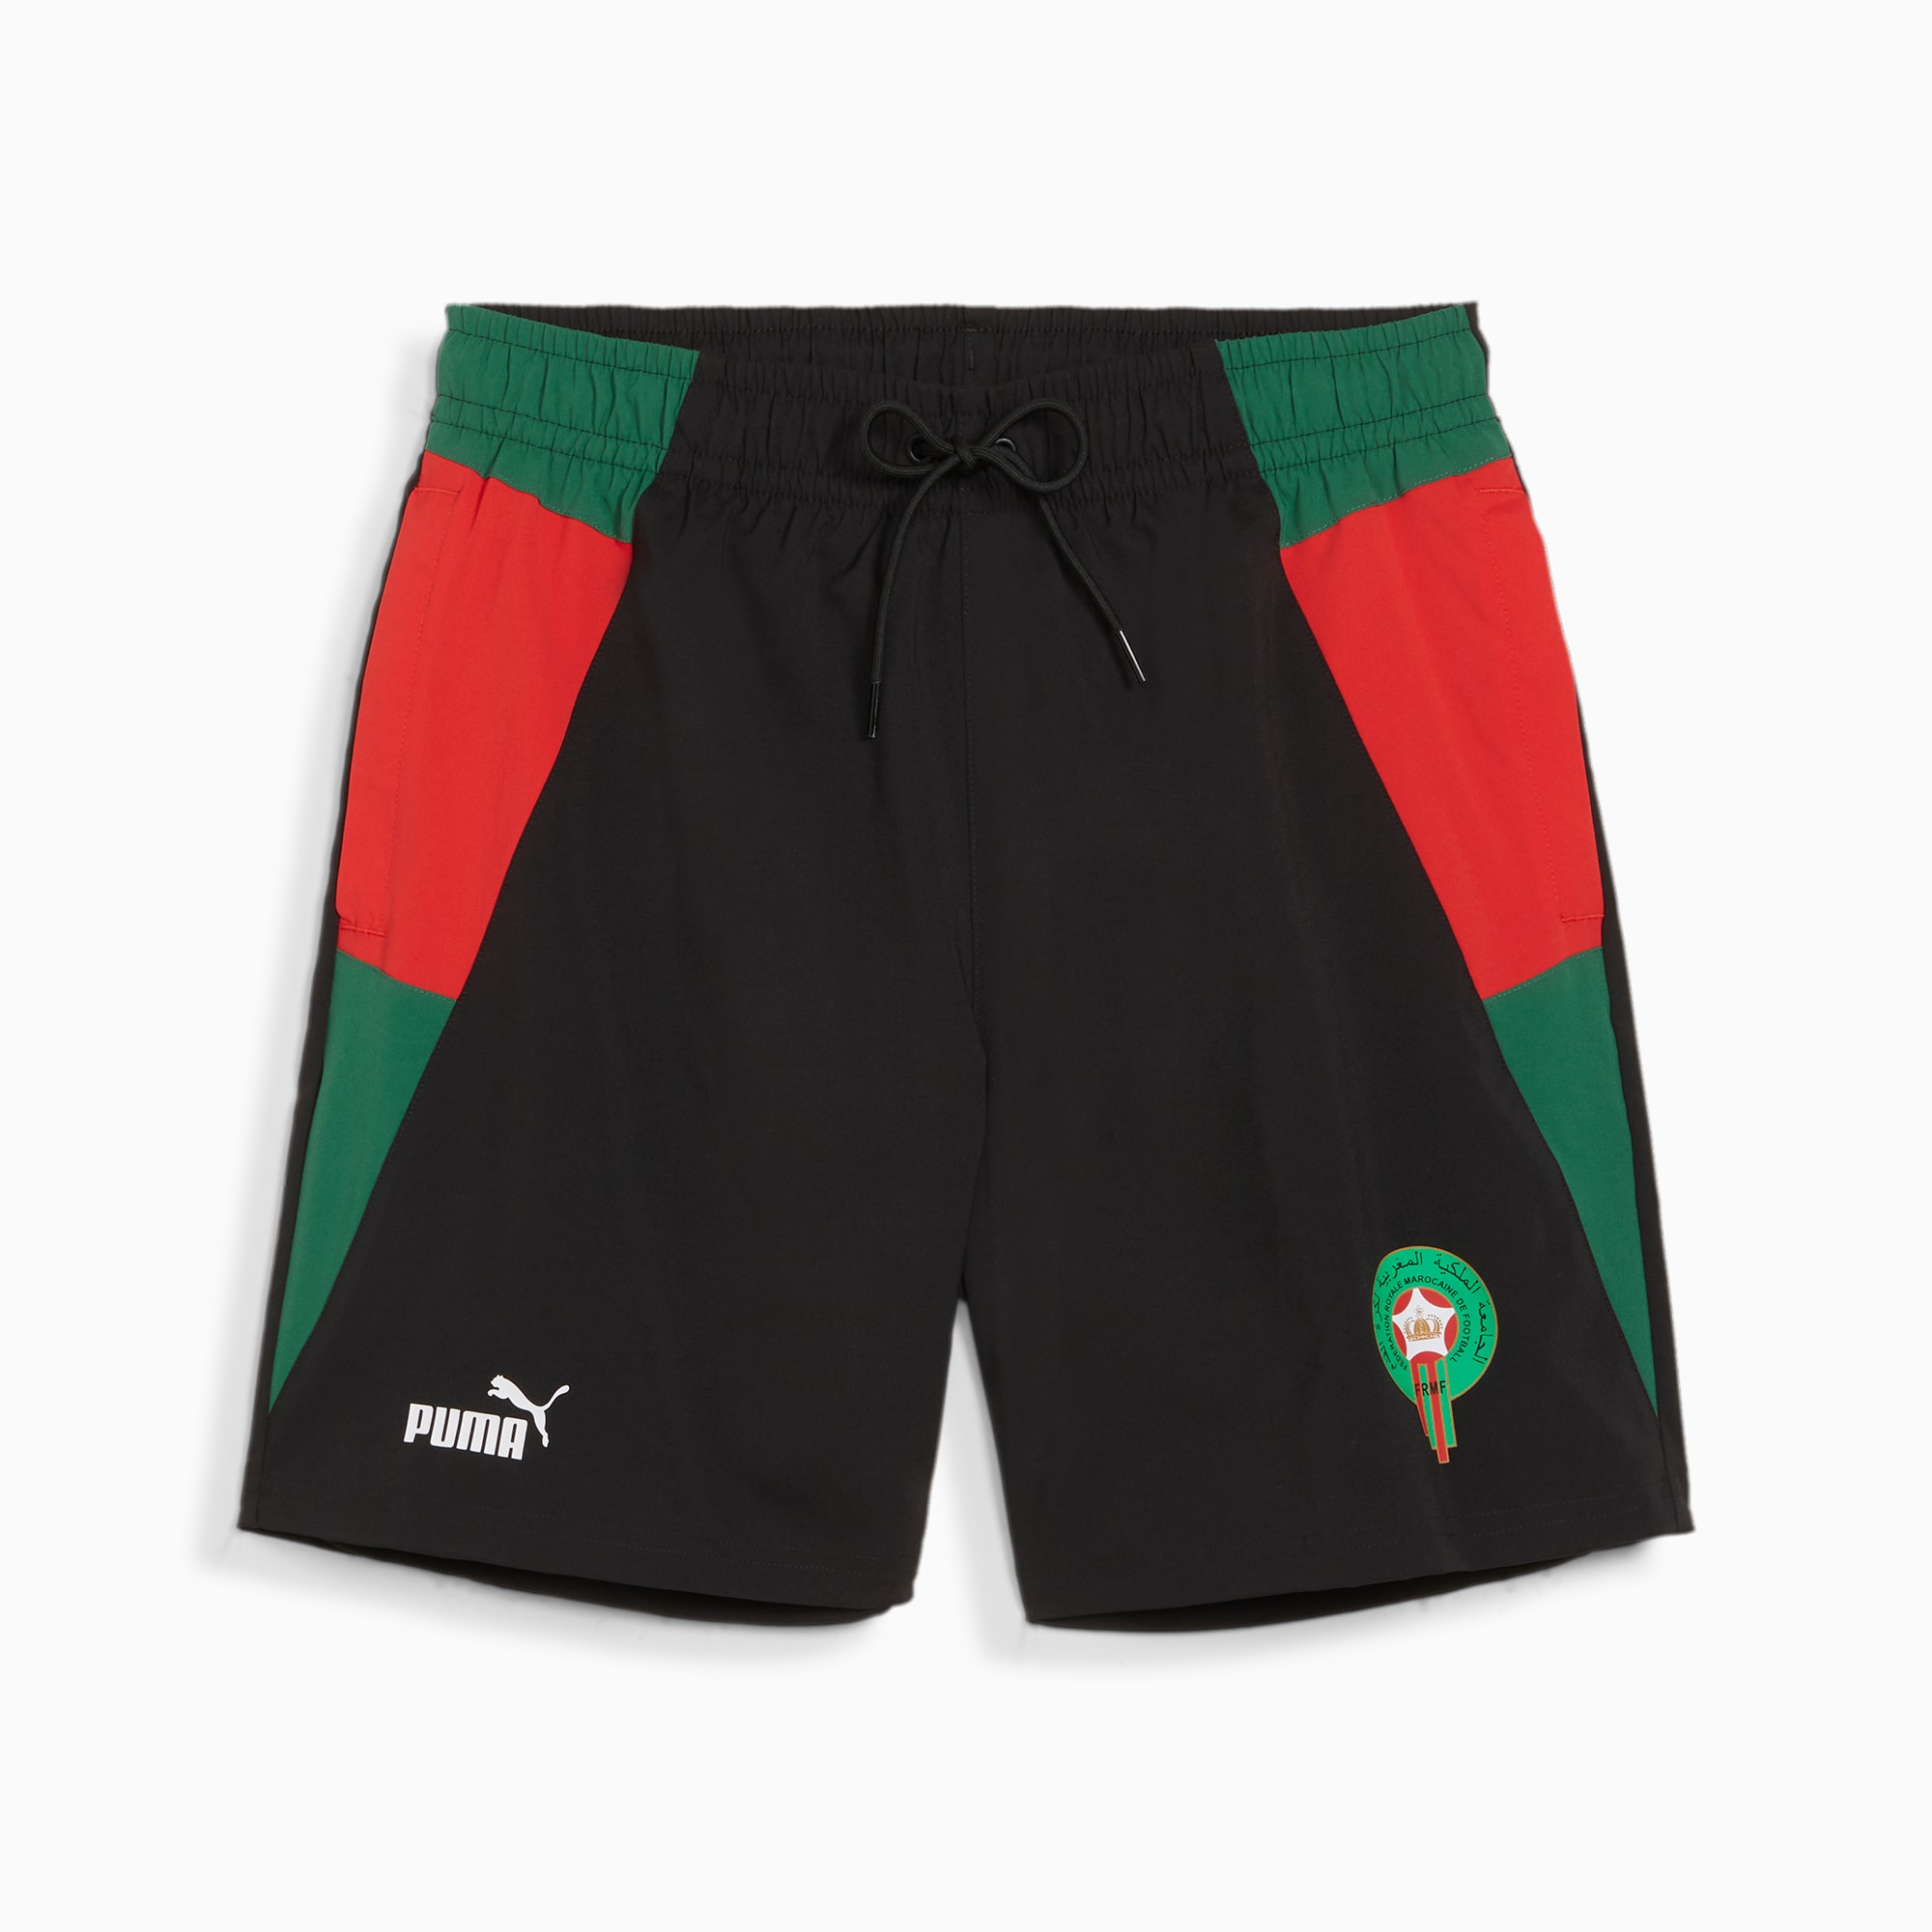 PUMA Morocco Men's Football Woven Shorts, Black/Vine/For All Time Red